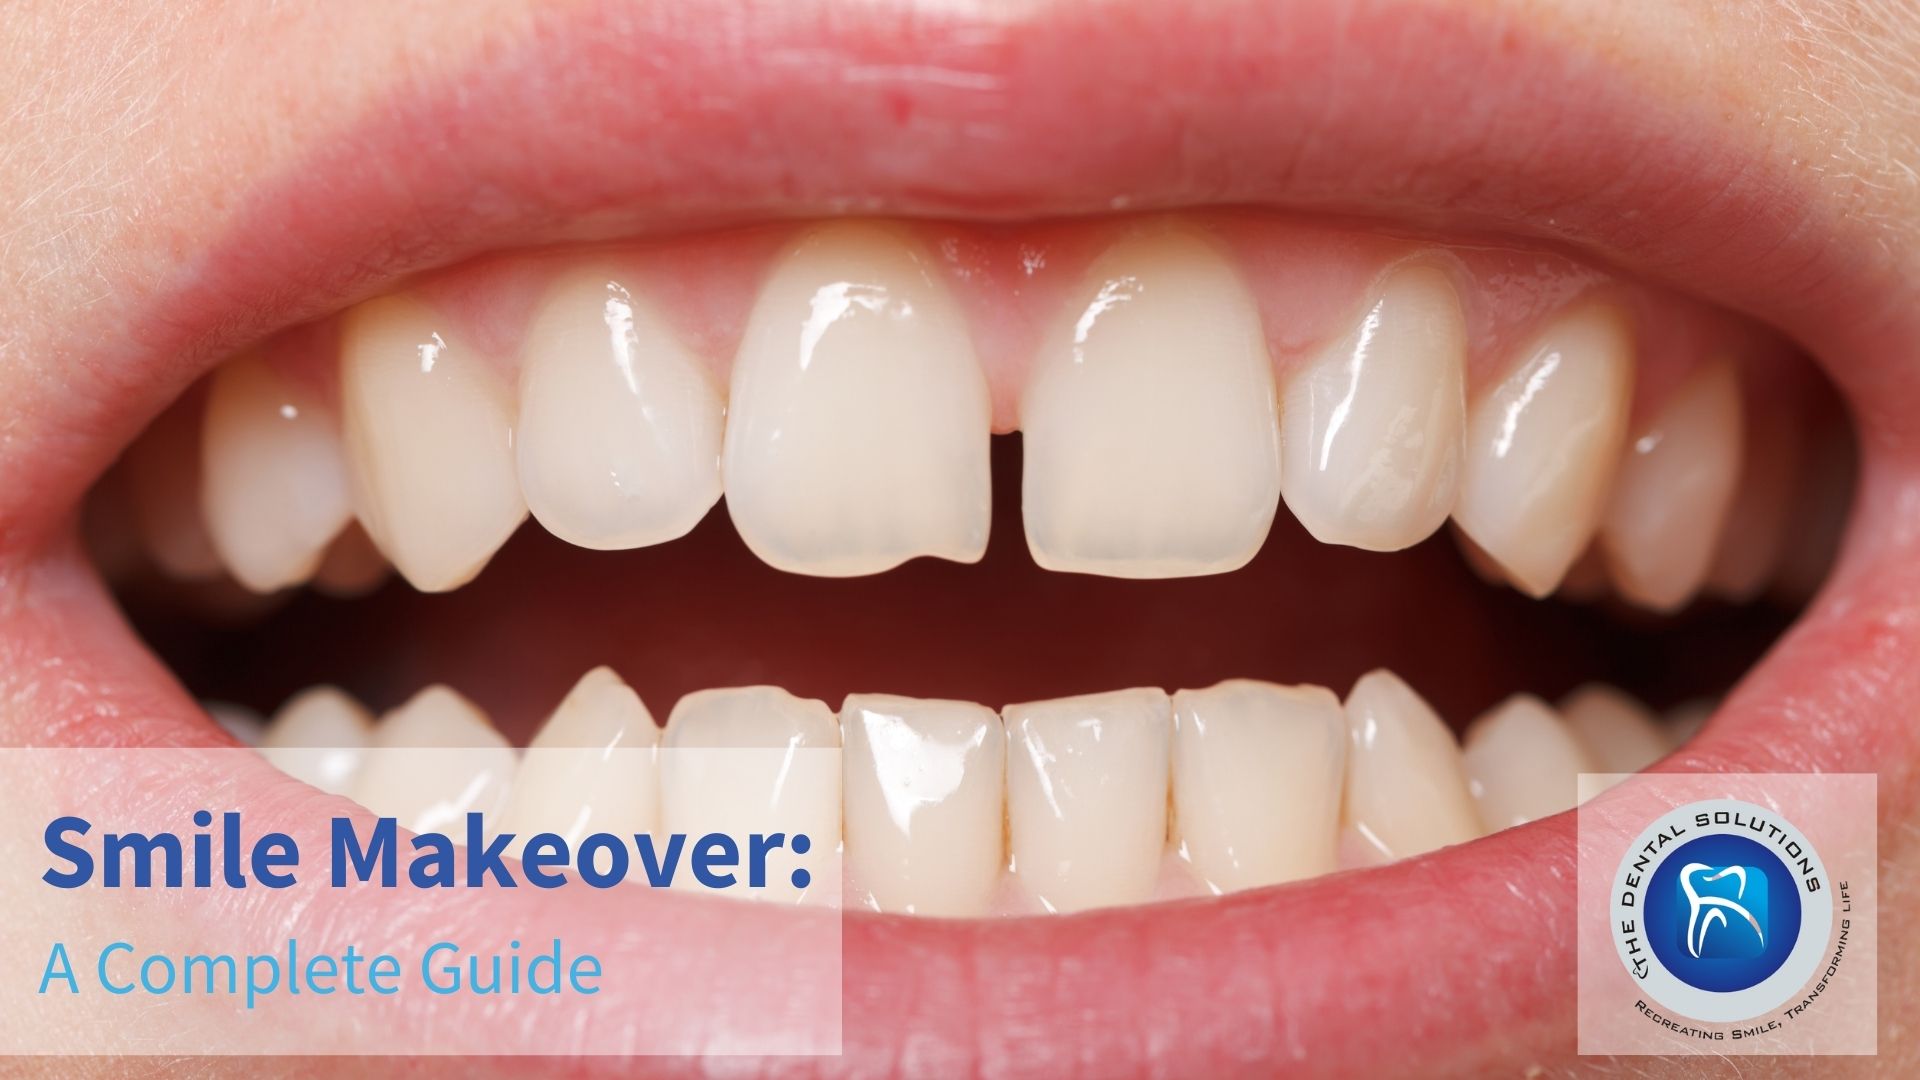 Smile Makeover: The Ultimate Teeth Transformation Guide